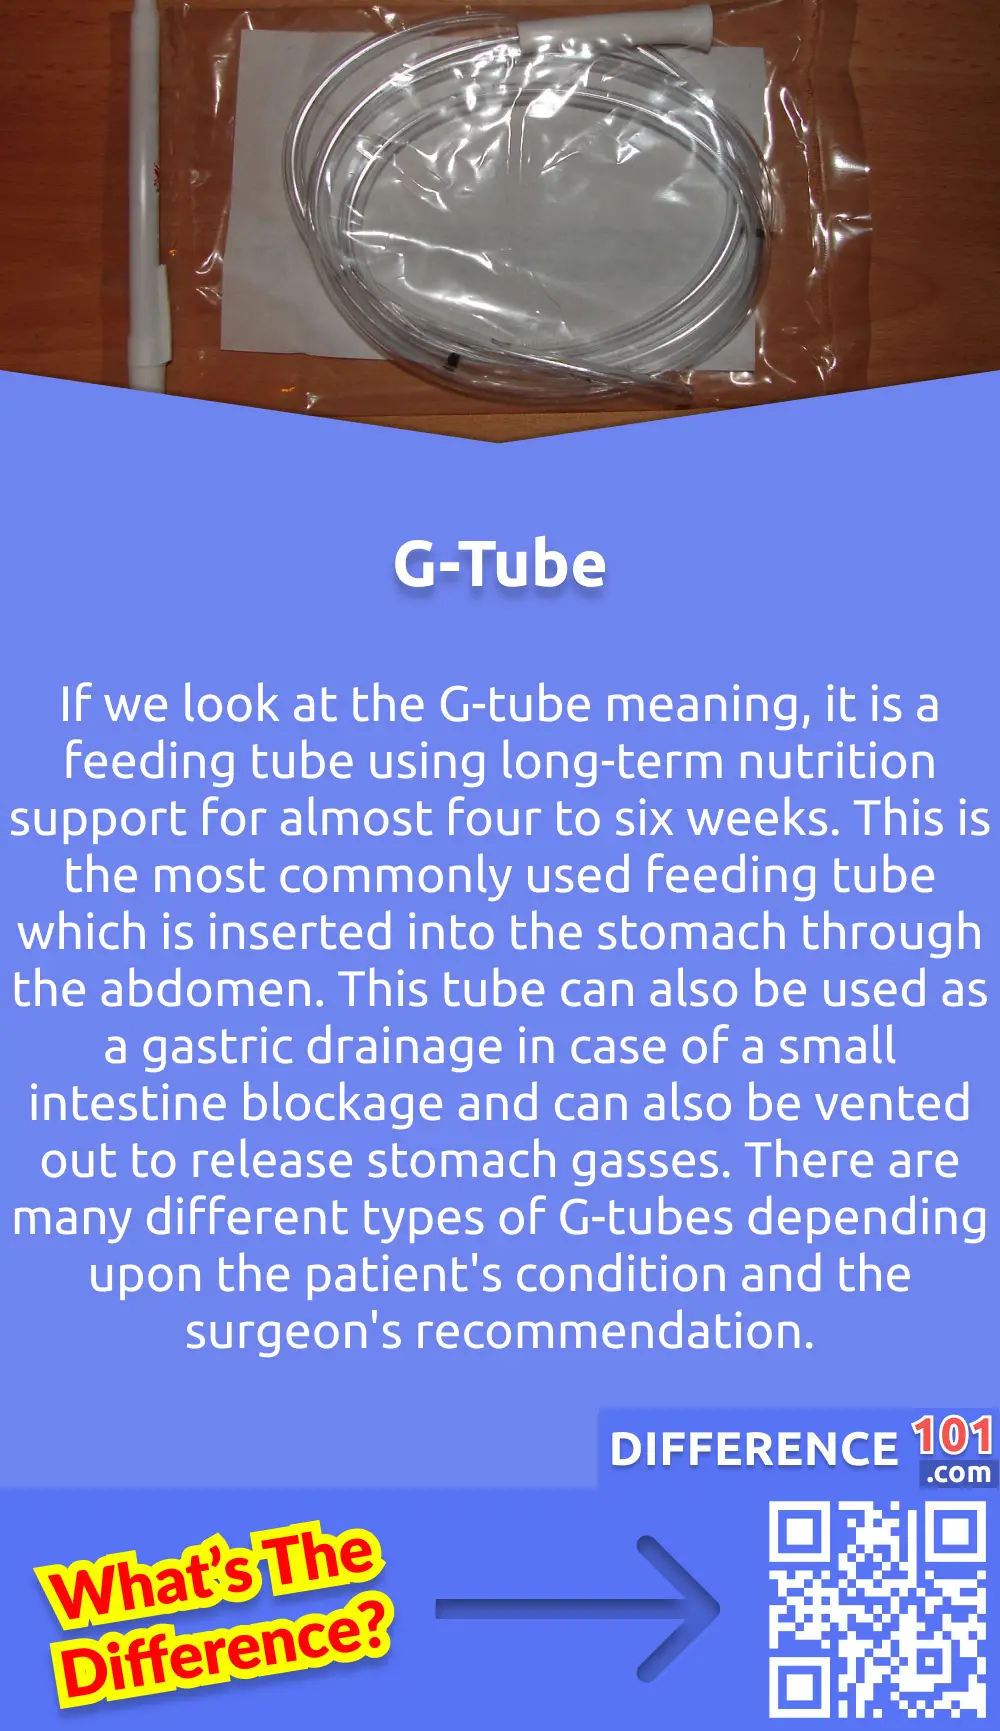 What Is G-Tube? If we look at the G-tube meaning, it is a feeding tube using long-term nutrition support for almost four to six weeks. This is the most commonly used feeding tube which is inserted into the stomach through the abdomen. This tube can also be used as a gastric drainage in case of a small intestine blockage and can also be vented out to release stomach gasses. G-tube is inserted into the stomach with the help of three different surgeries. The first one is by creating an inside opening via scope. The second one is by a small incision, with the help of a laparoscope. And the last one is through a large incision. The best thing about G-tubes is that they can be easily changed at home as there is not any complicated procedure to change these. There are many different types of G-tubes depending upon the patient's condition and the surgeon's recommendation.
